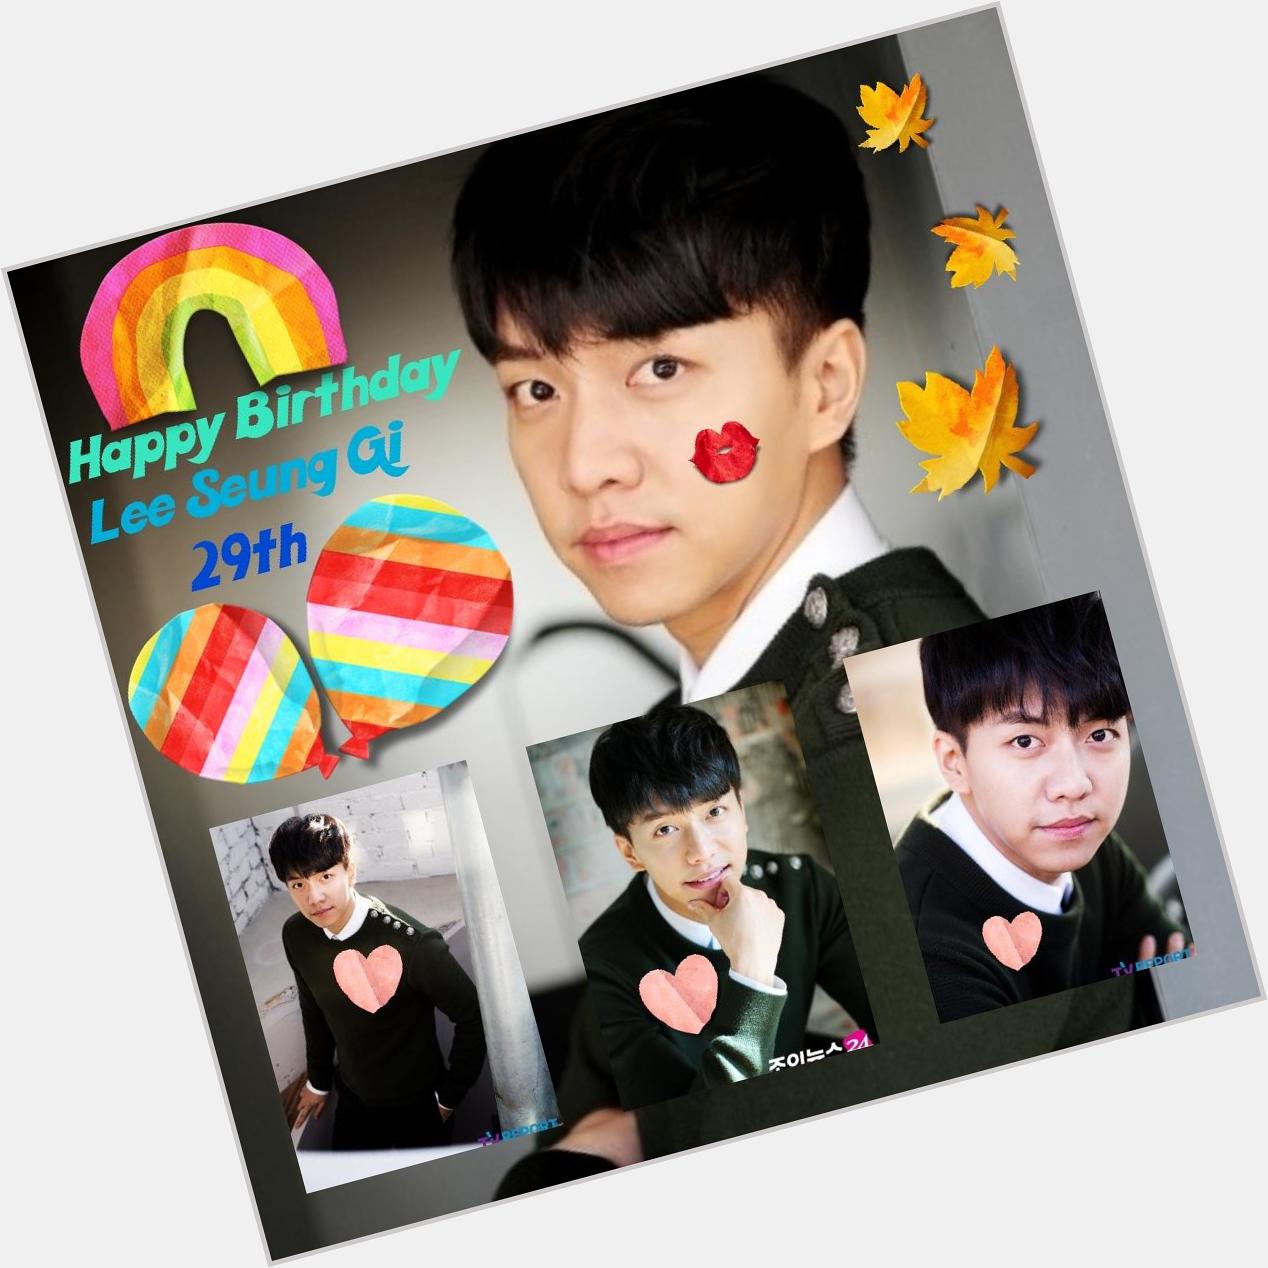 HAPPY BIRTHDAY LEE SEUNG GI
 hope your movie big hit & hope your healty and happiness  